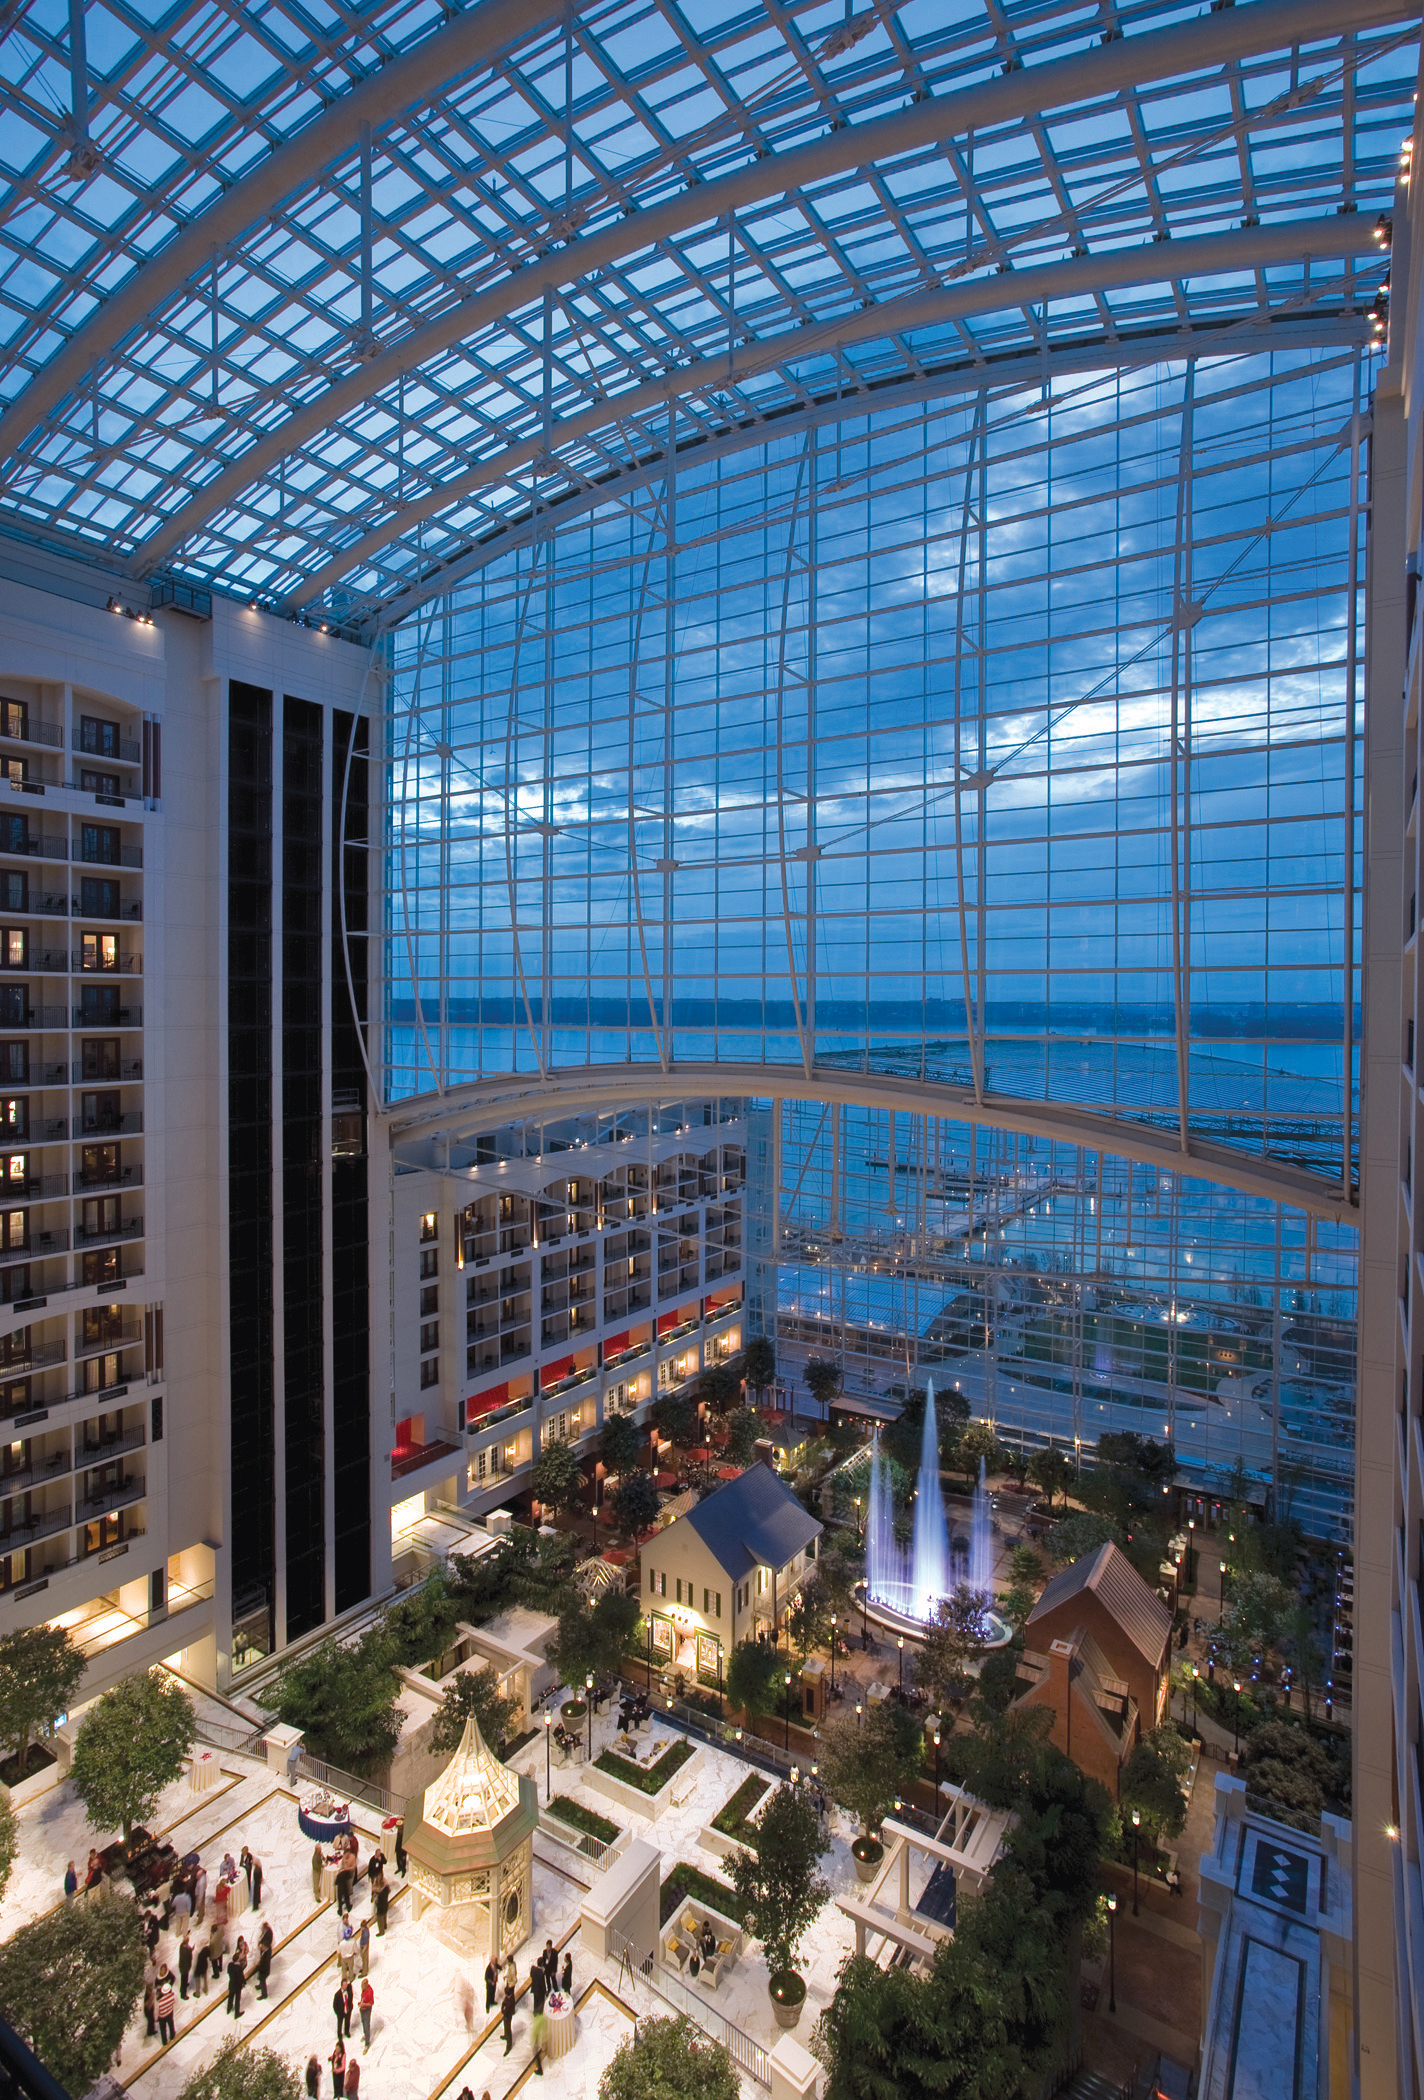 Atrium of the Gaylord National Resort and Conference Centre